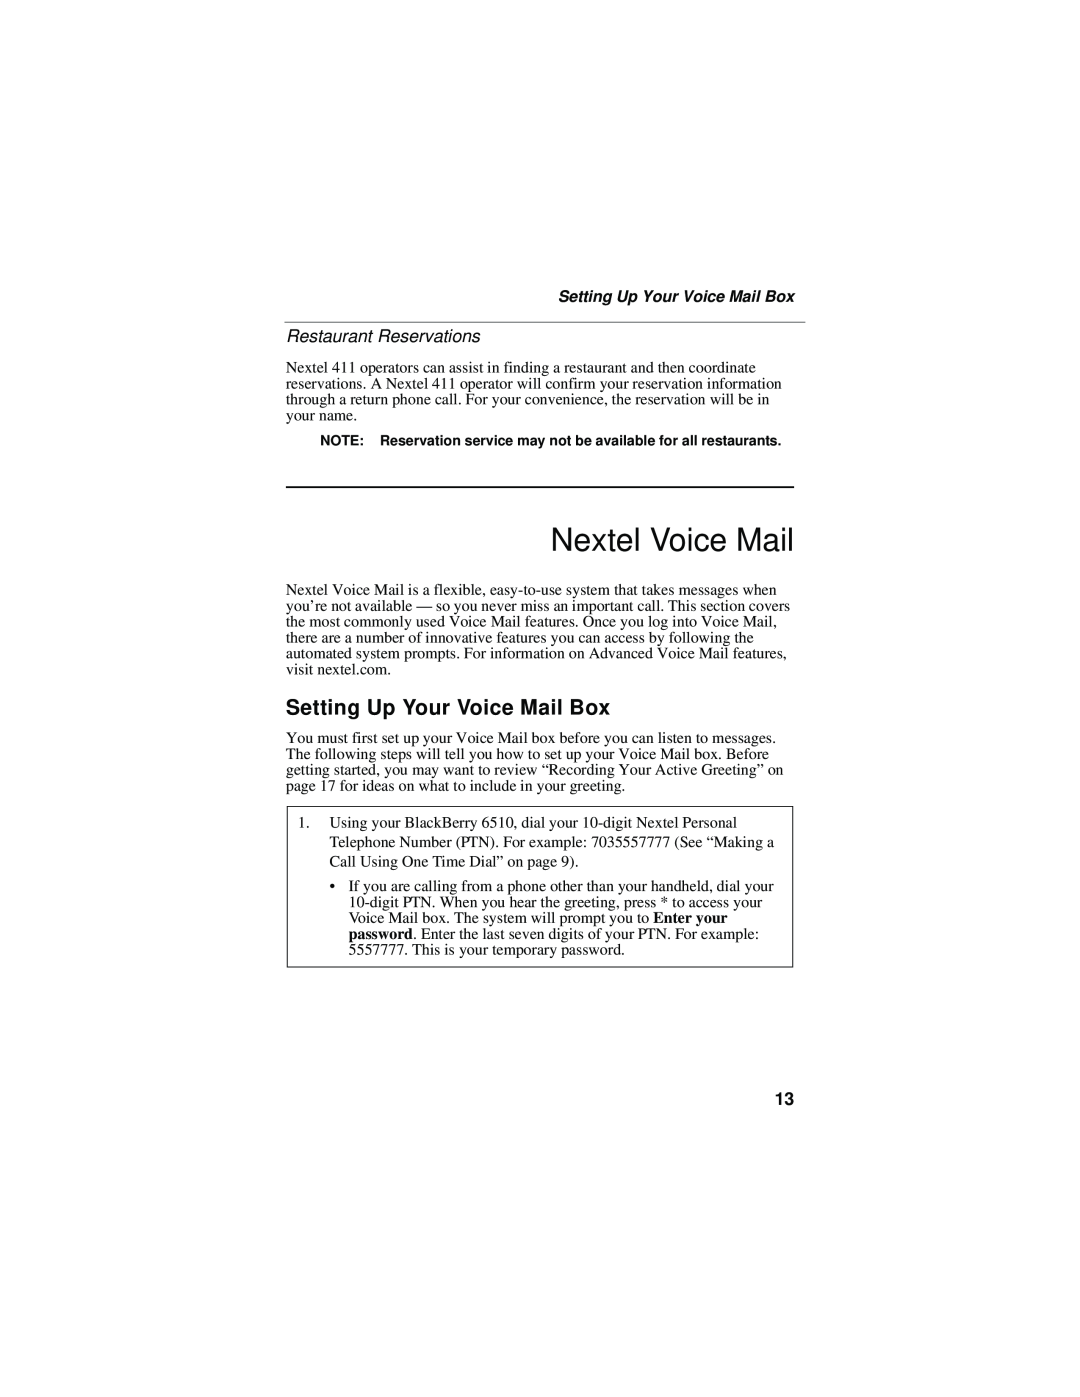 Nextel comm 6510 manual Nextel Voice Mail, Setting Up Your Voice Mail Box, Restaurant Reservations 